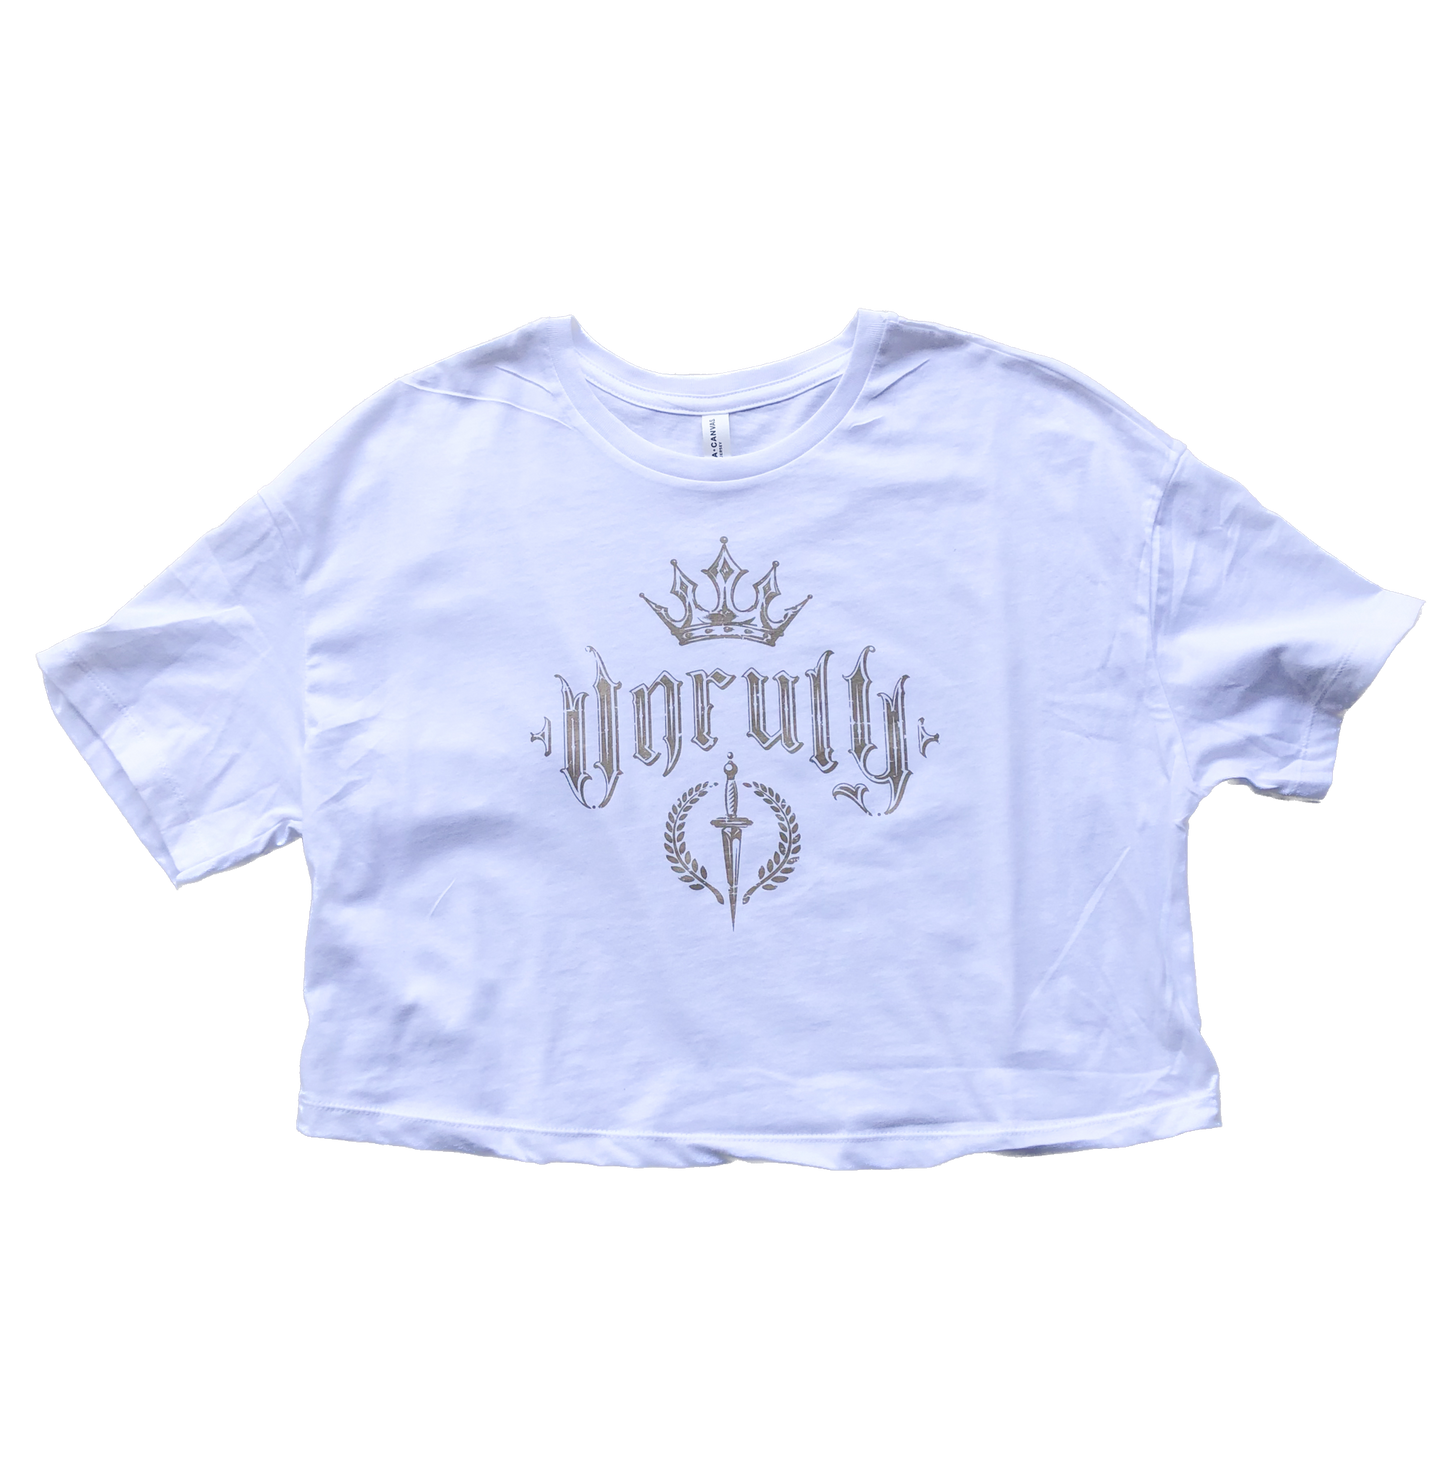 "Unruly" Cropped Tee